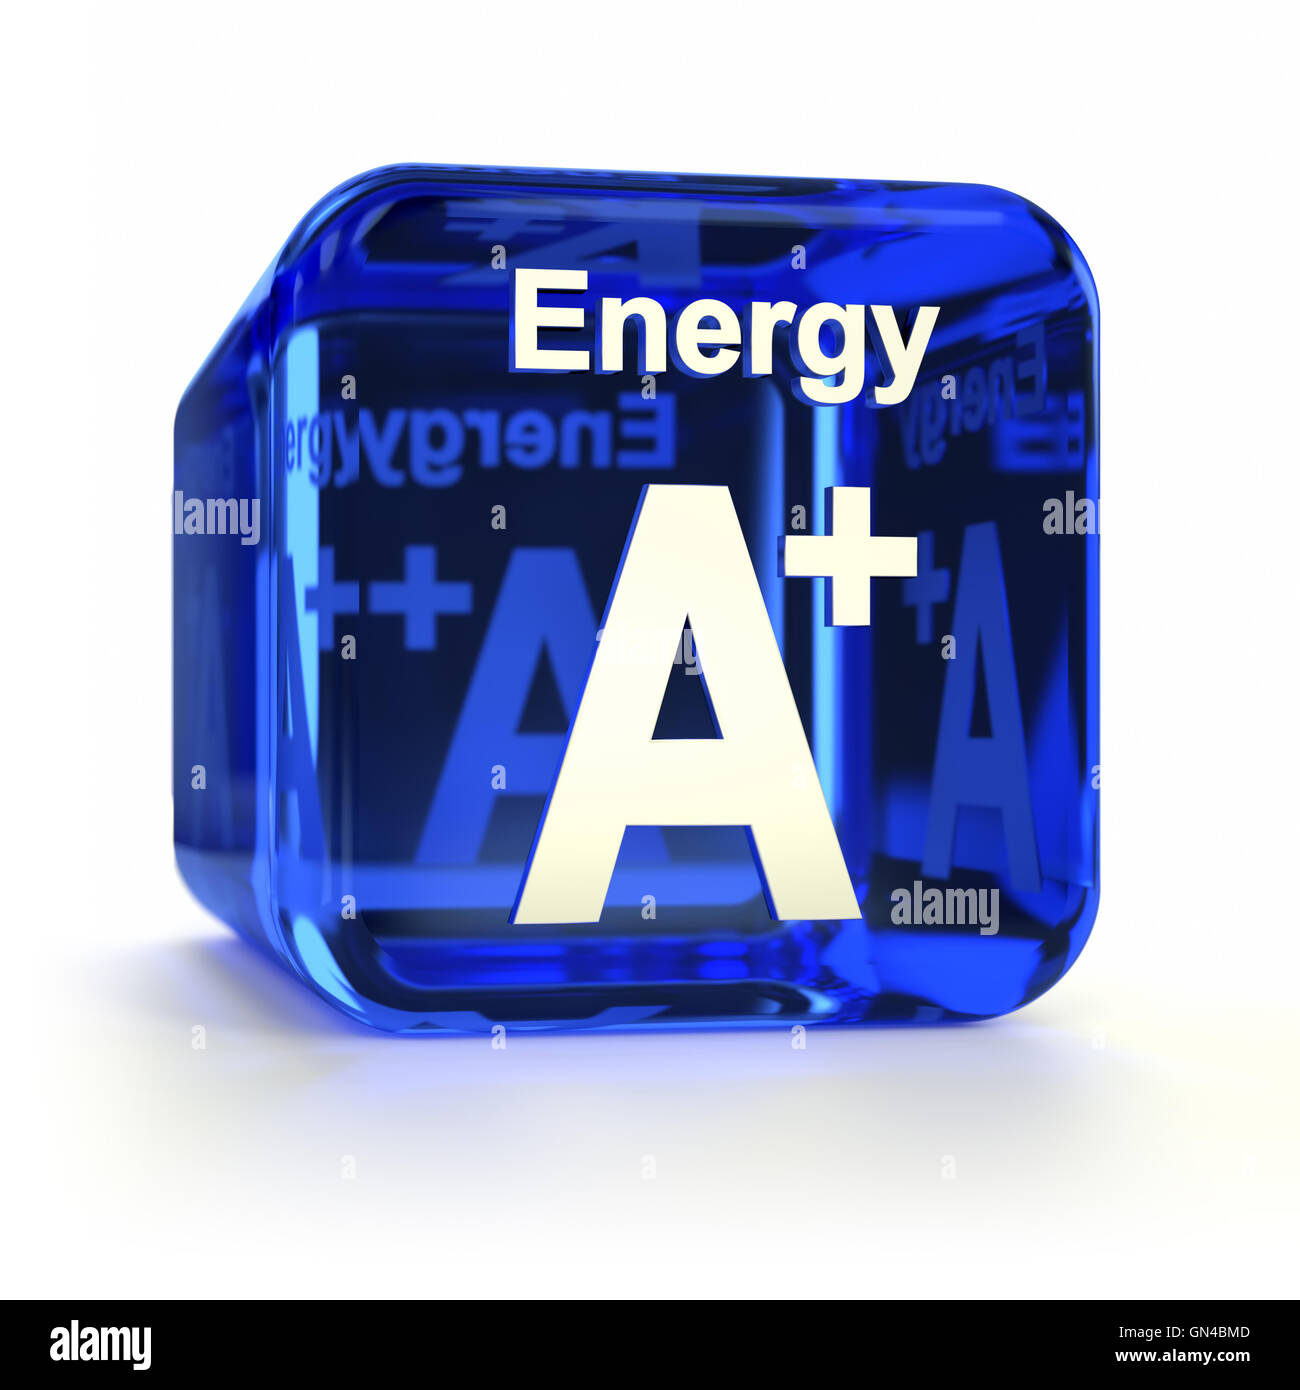 Energy Efficiency Rating A+ Stock Photo